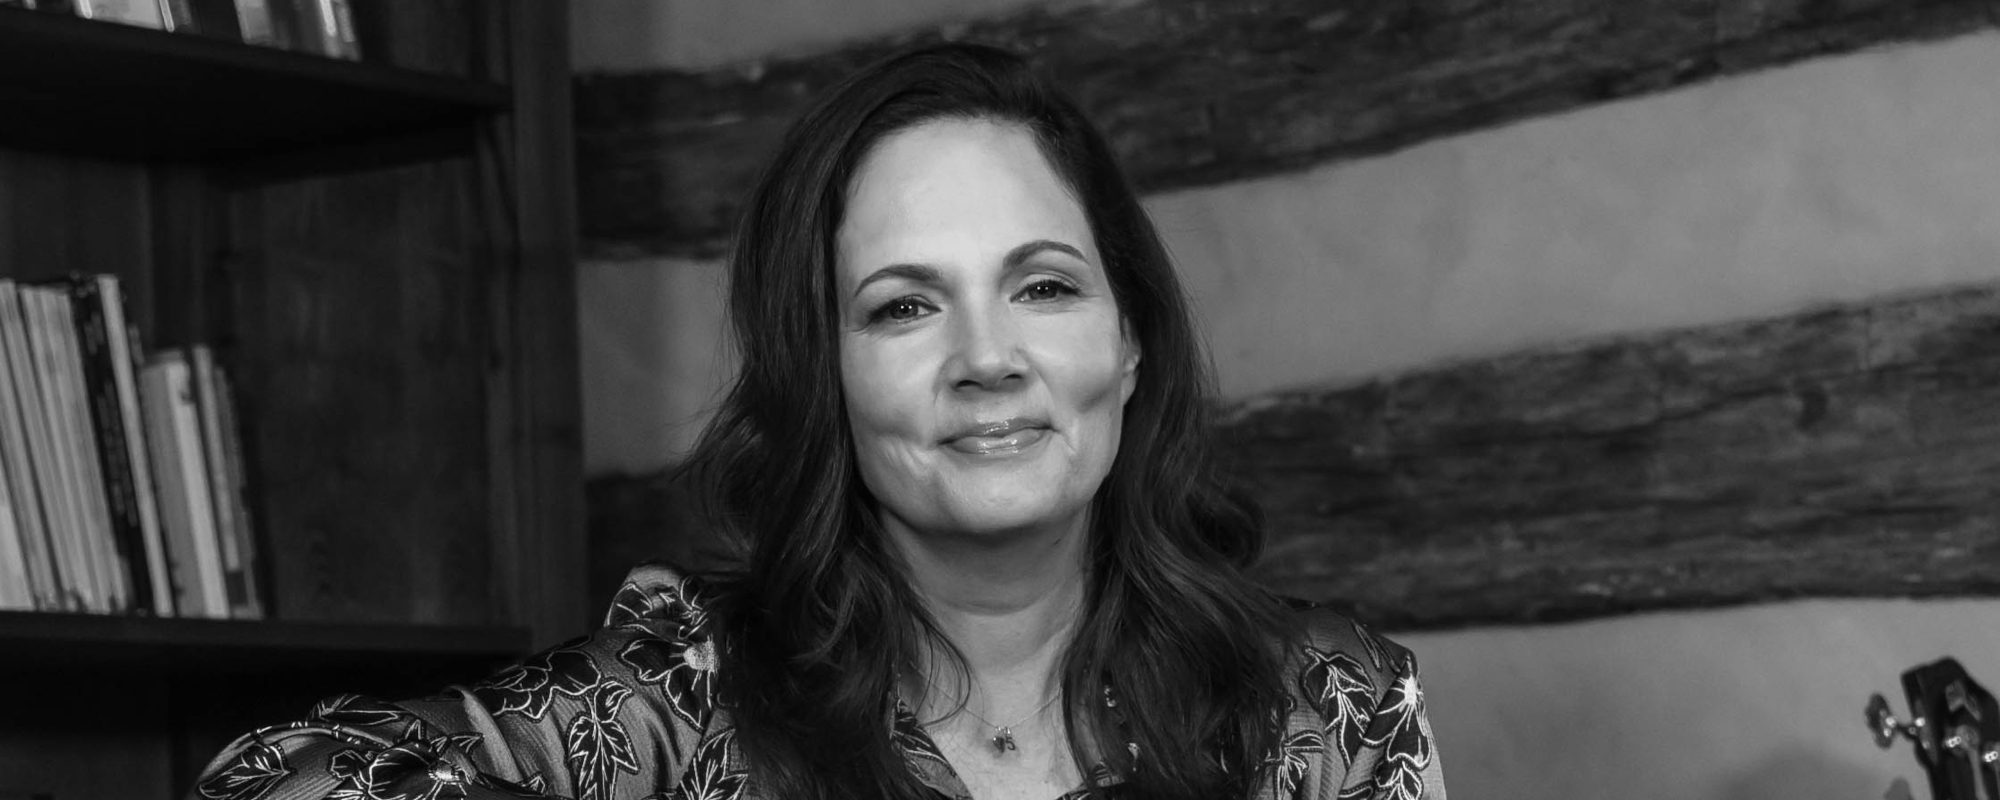 Barry Dean, Lori McKenna and Luke Laird Announce 'The Songwriter Tapes ...